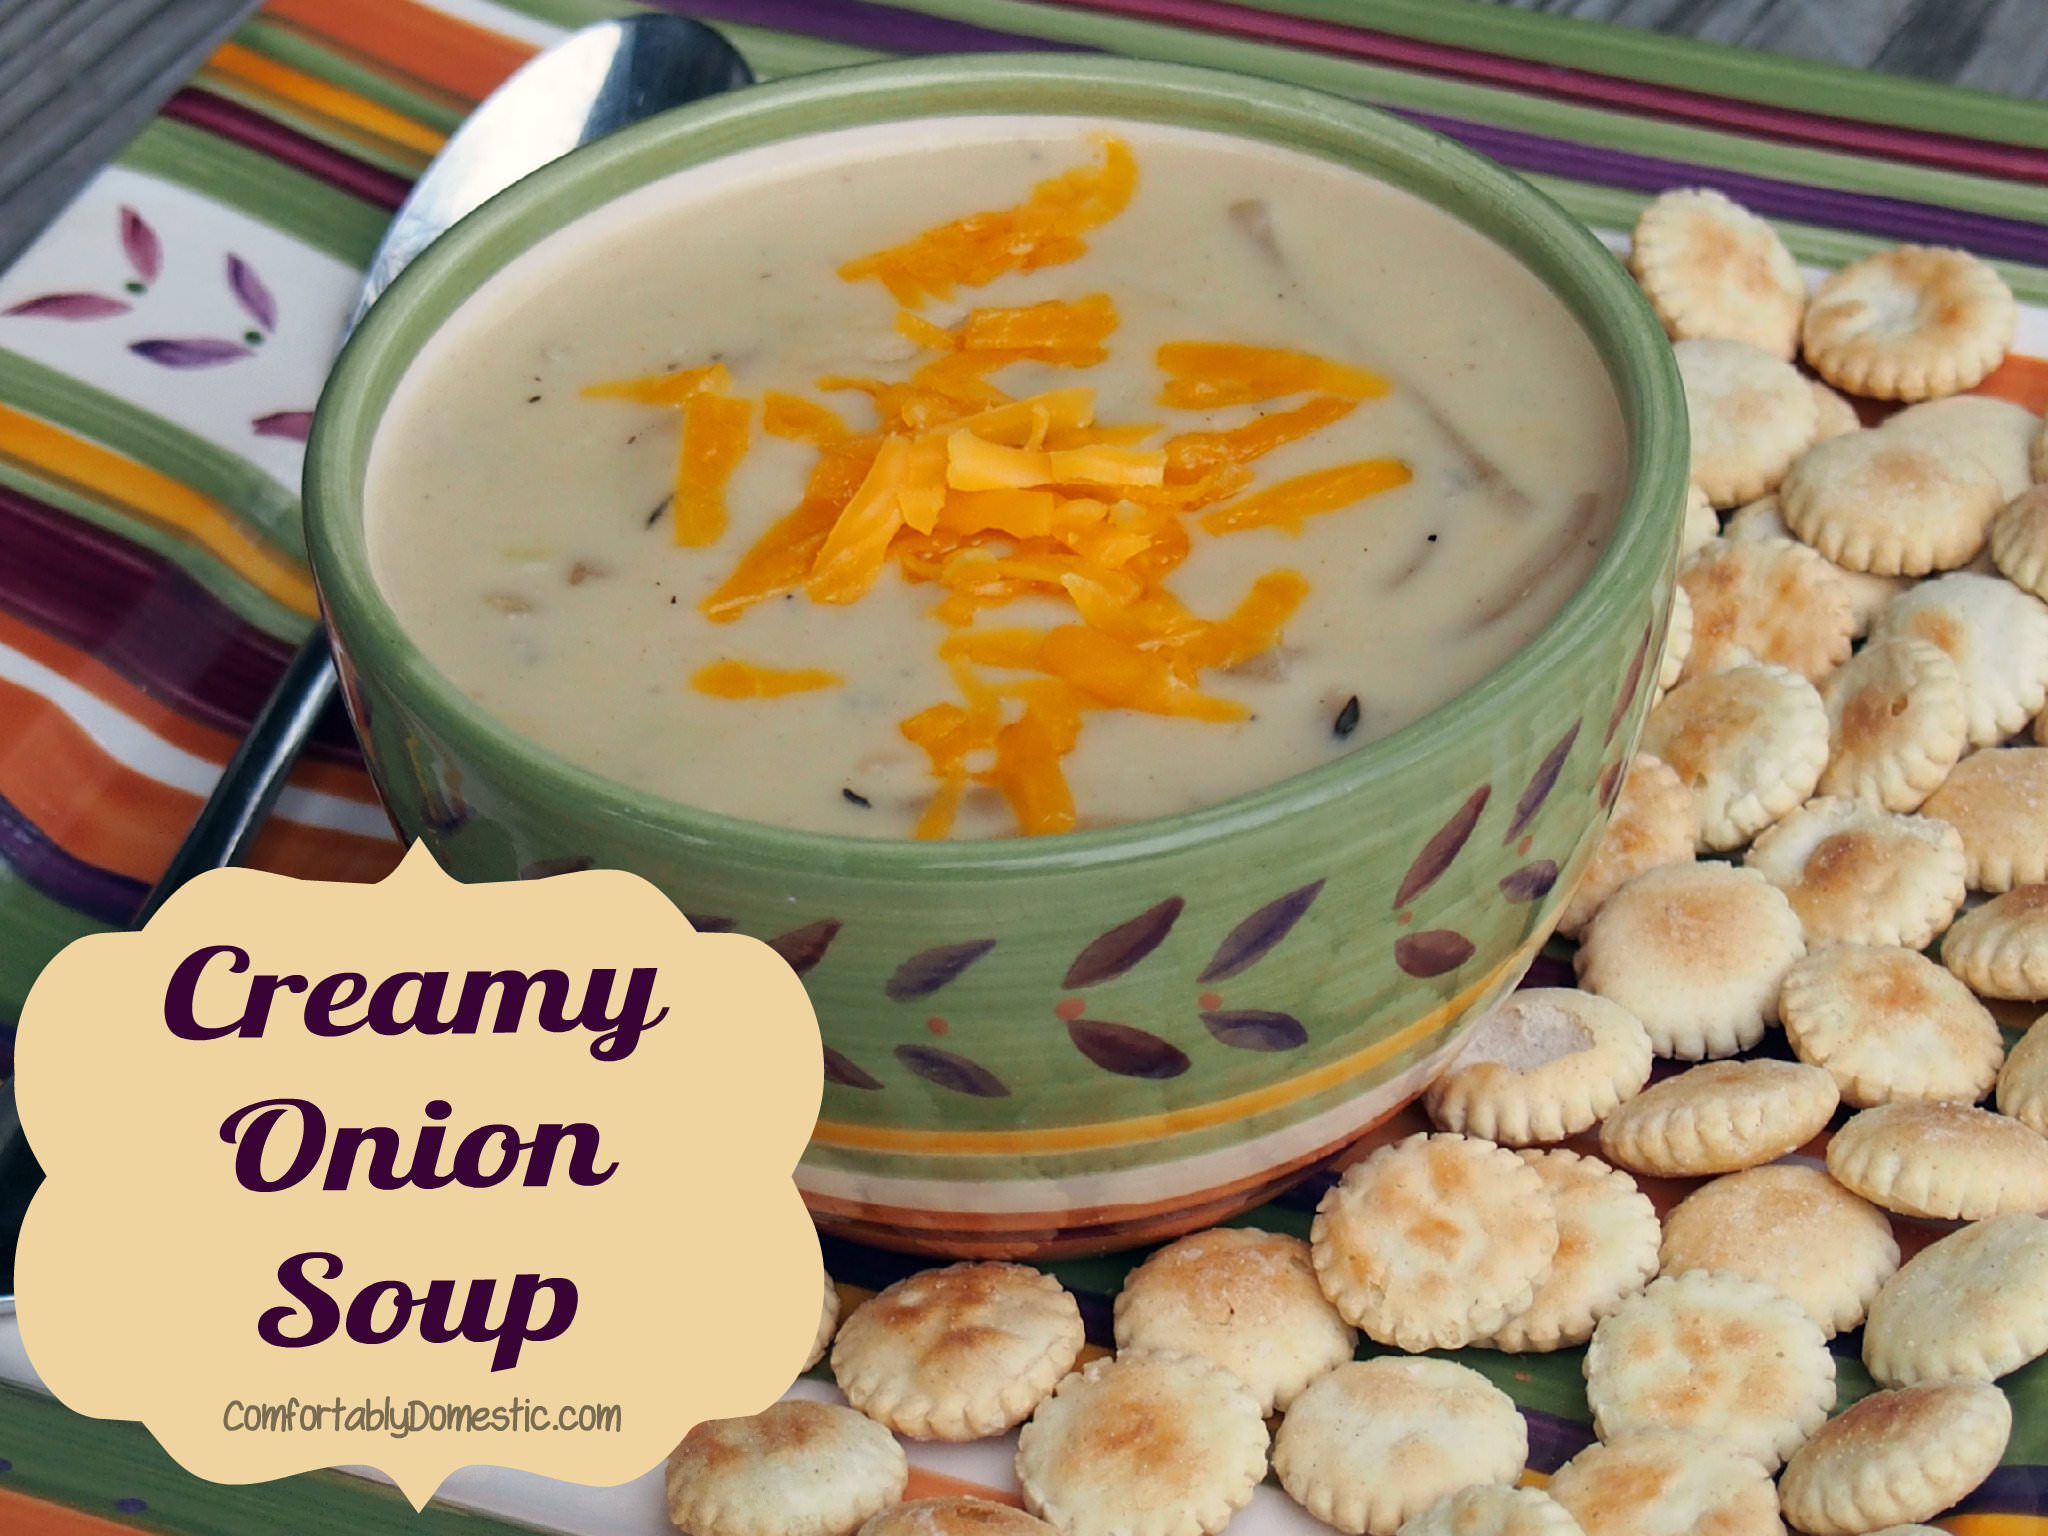 Creamy onion soup has loads of tender sweet onions, swimming in a flavorful, blended cheese base. This soup is a soothing meal or side dish. | ComfortablyDomestic.com